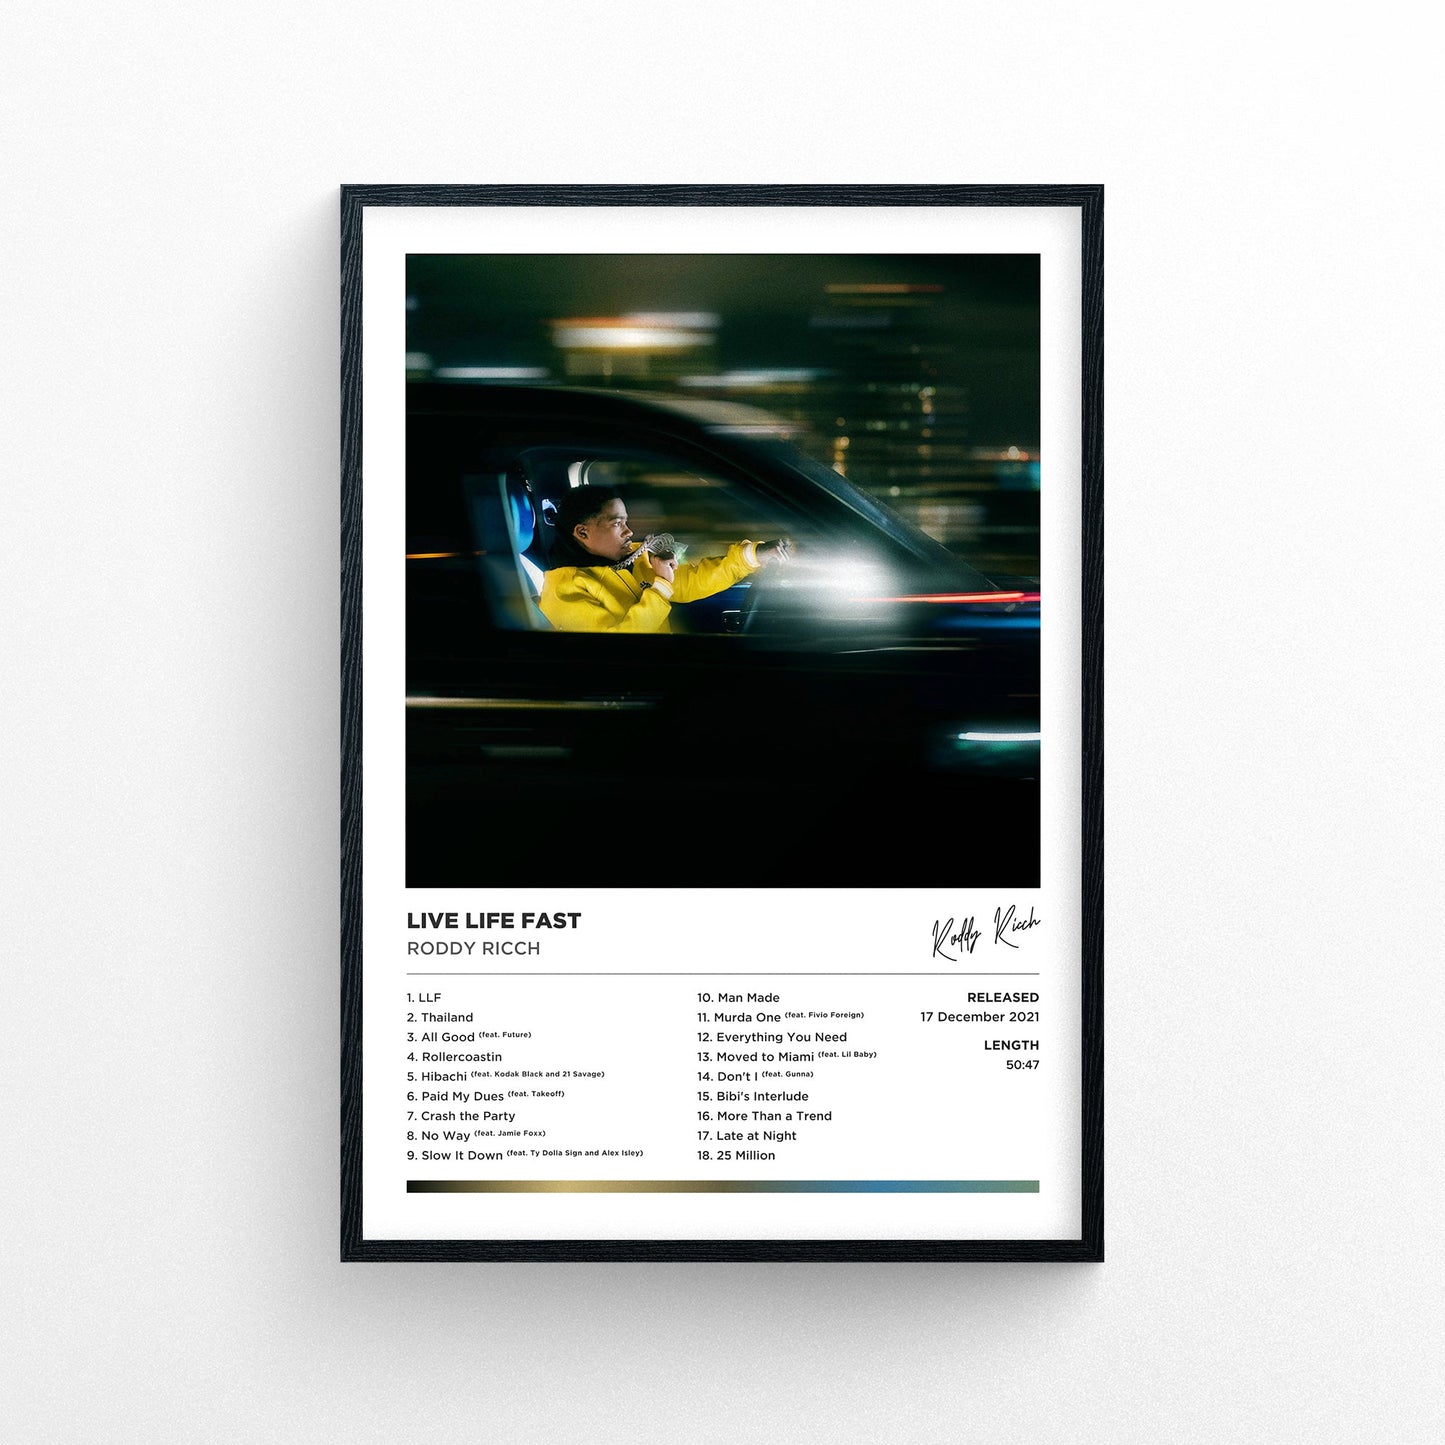 Roddy Ricch - Live Life Fast Framed Poster Print | Polaroid Style | Album Cover Artwork